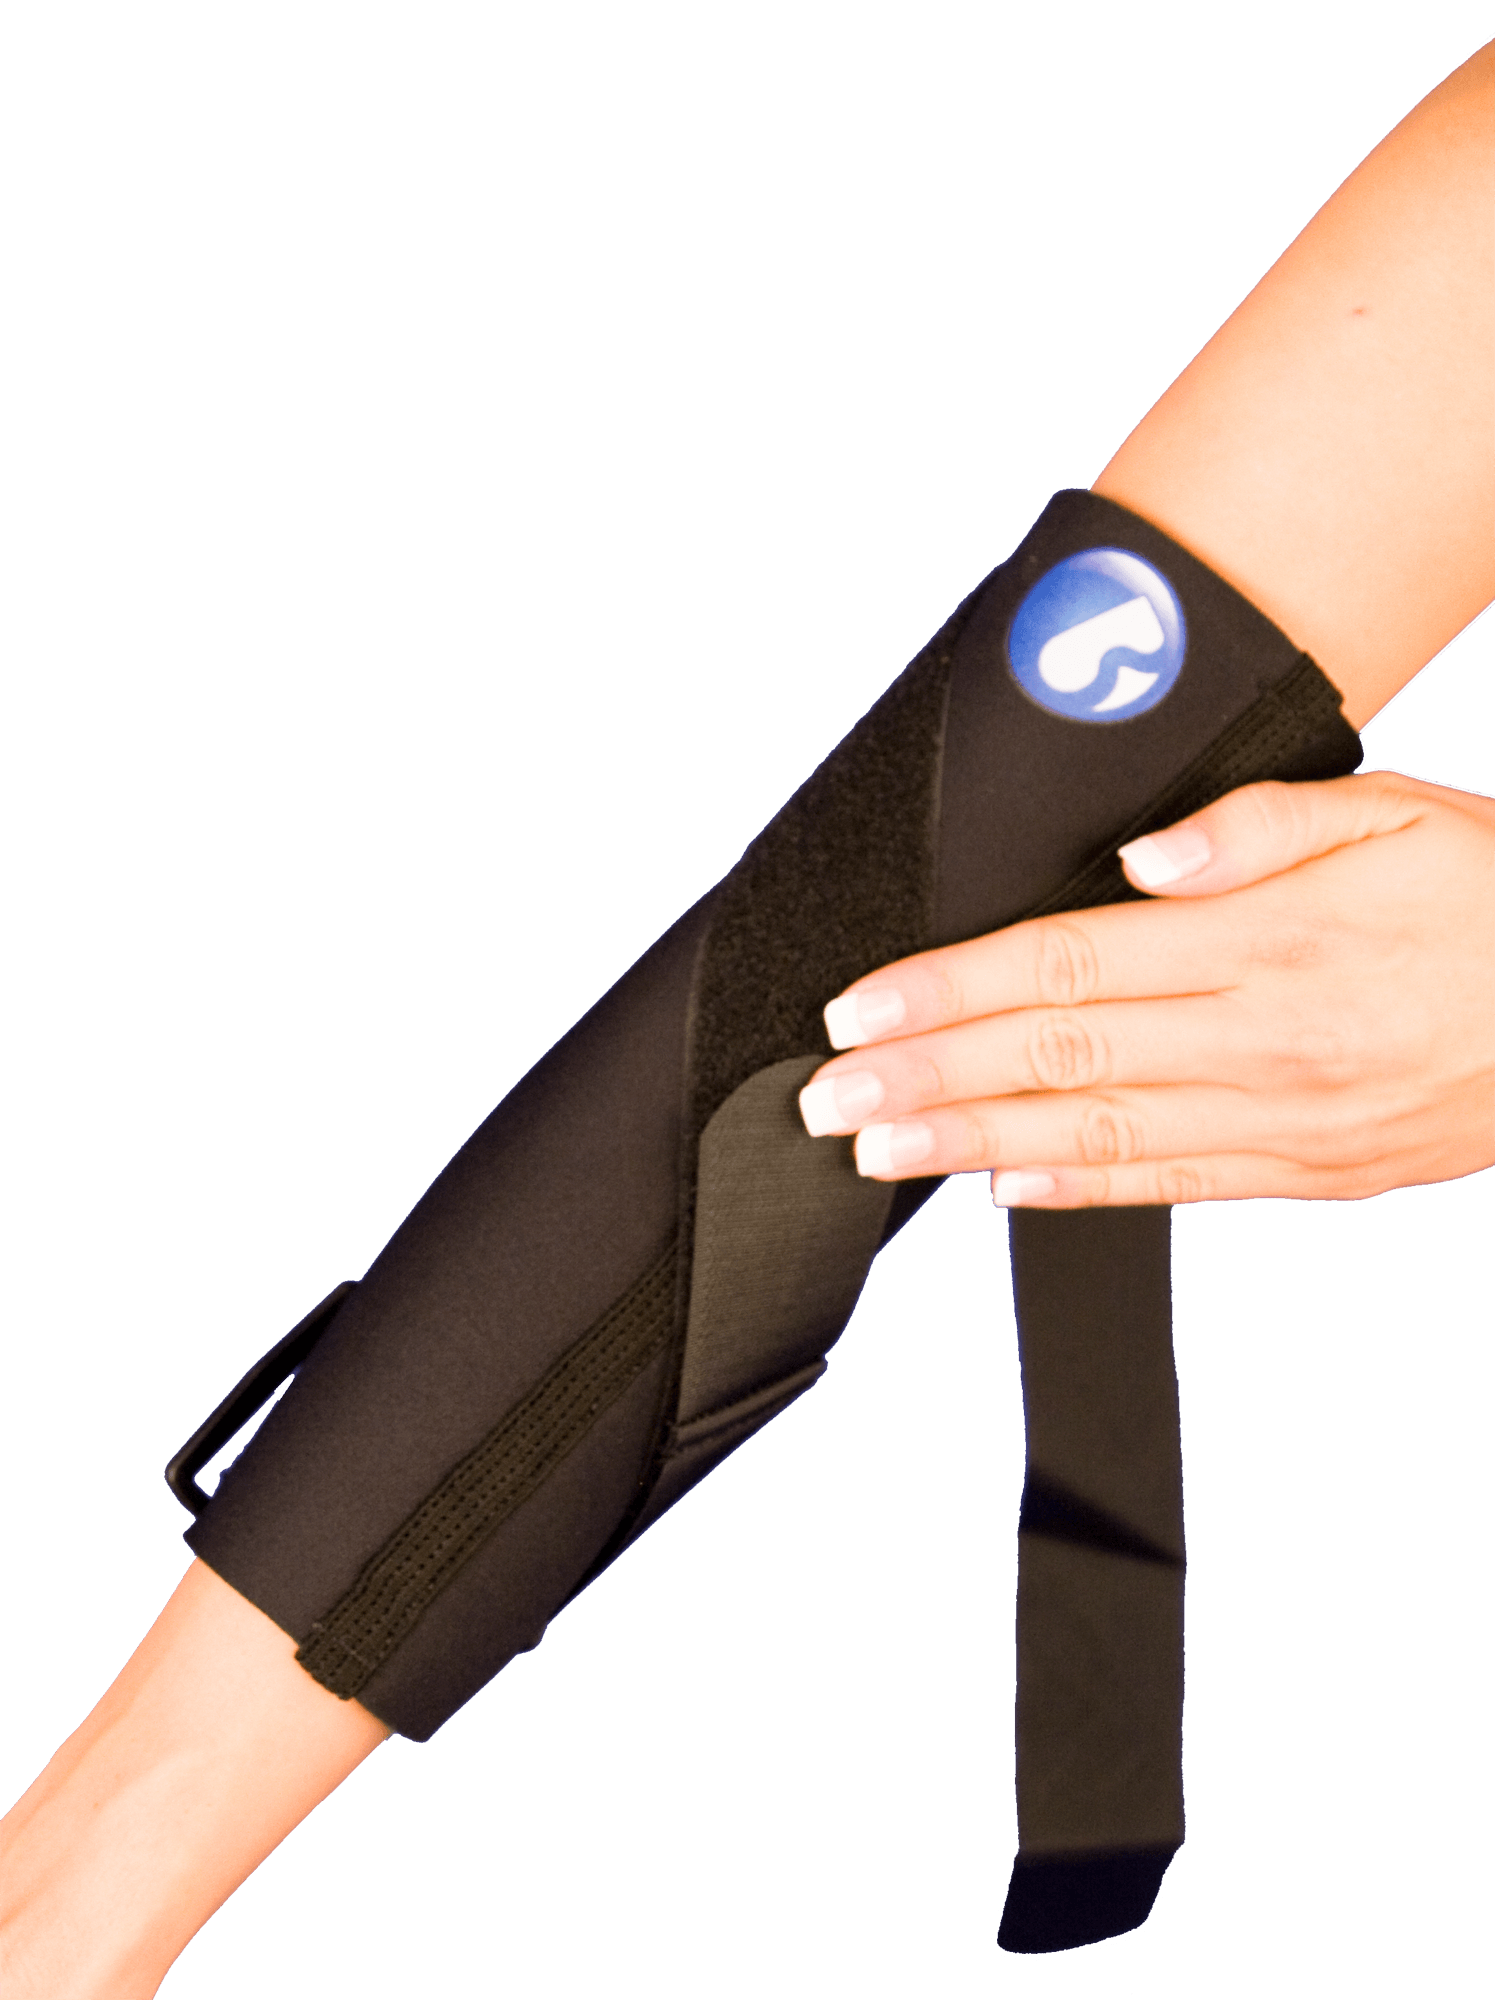 Bunga Braces - Hyperextension Elbow Support with Hinge